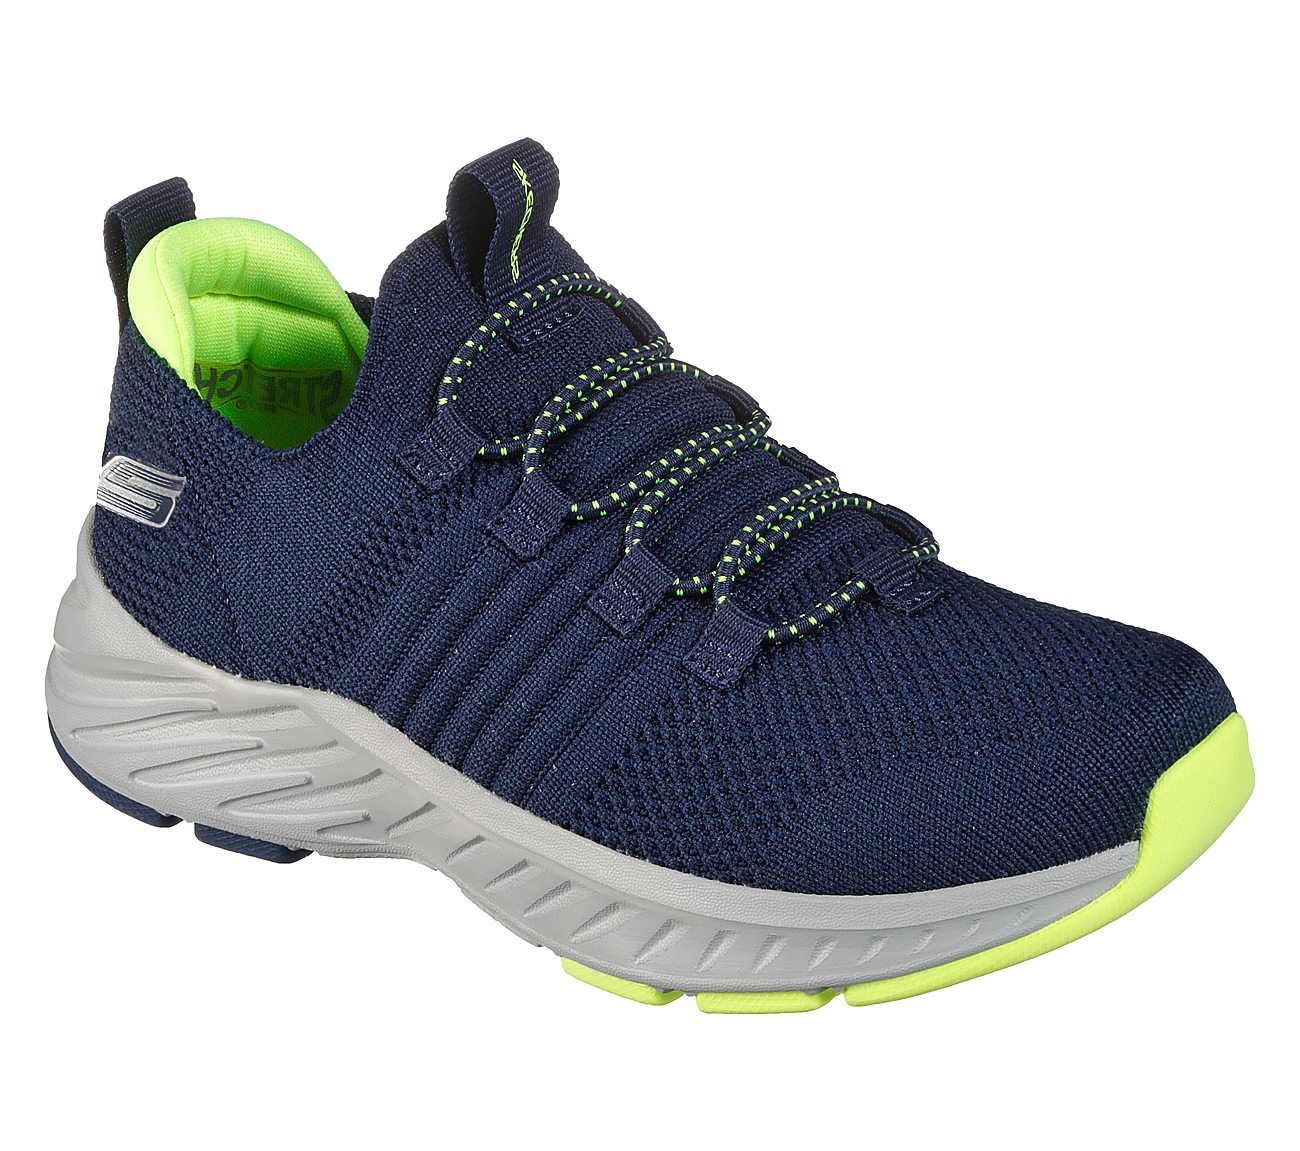 ELITE RUSH, NAVY/LIME Footwear Lateral View